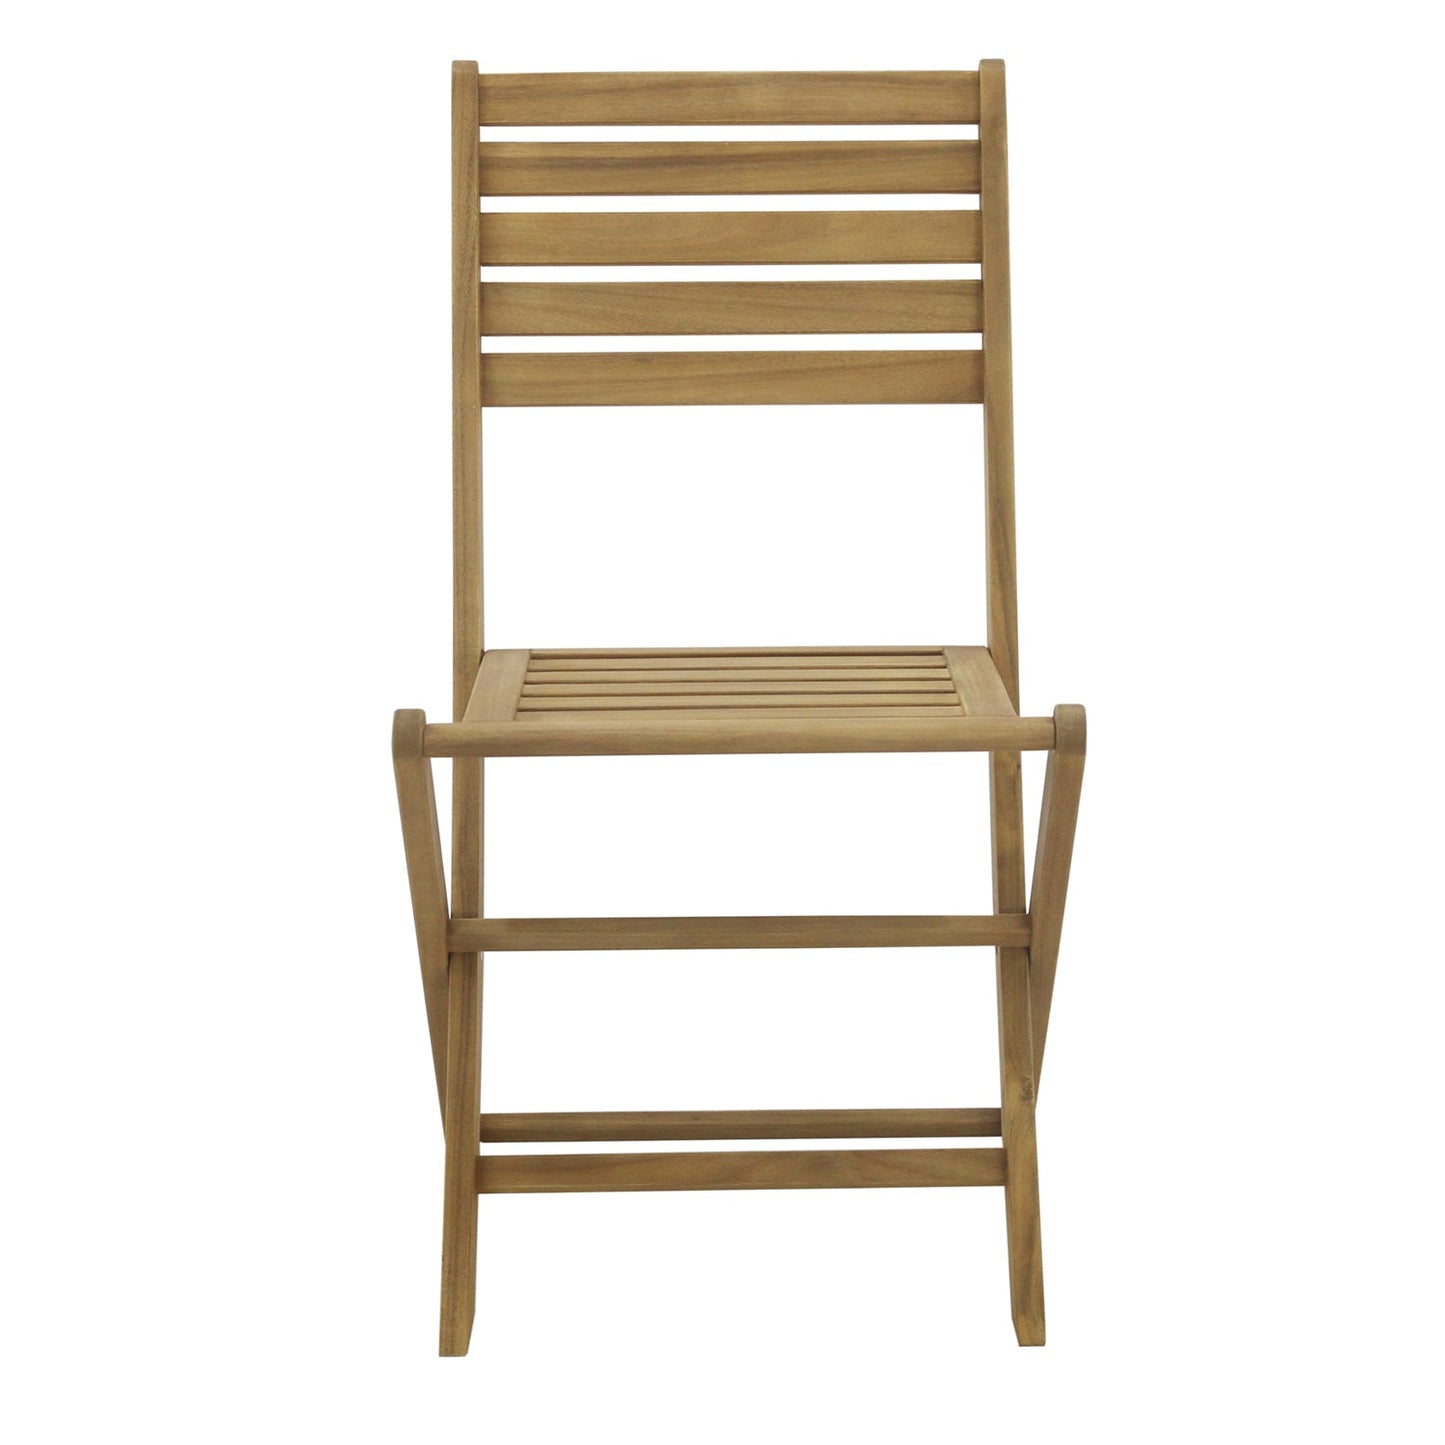 Outdoor dining chairs - set of 2 - solid acacia wood